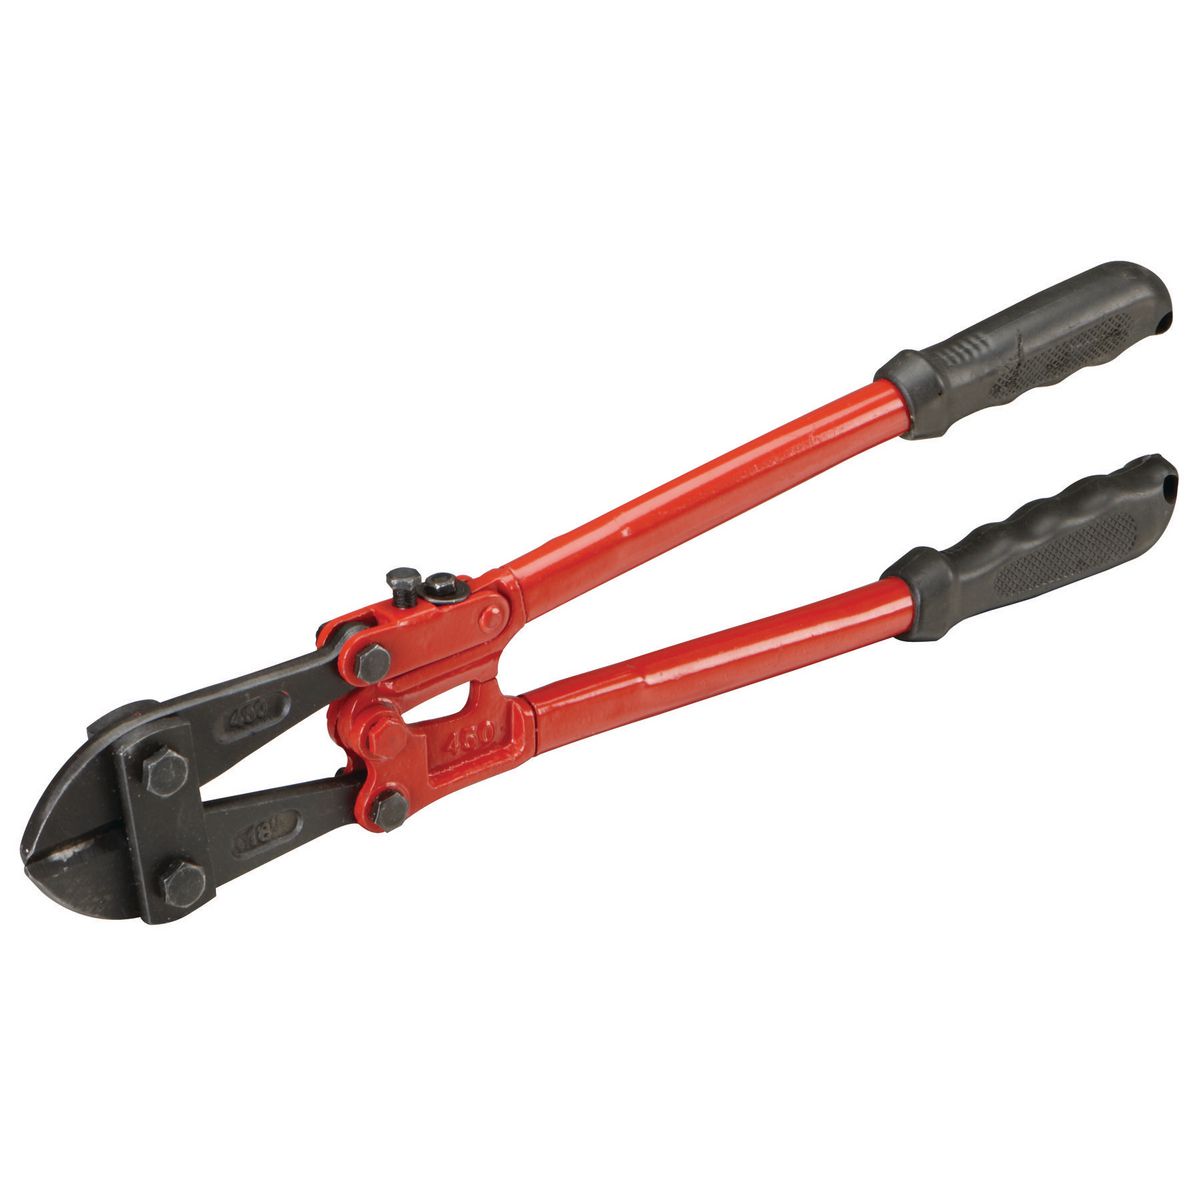 PITTSBURGH 18 in. Bolt Cutters – Item 60683 / 41148 – Harbor Freight